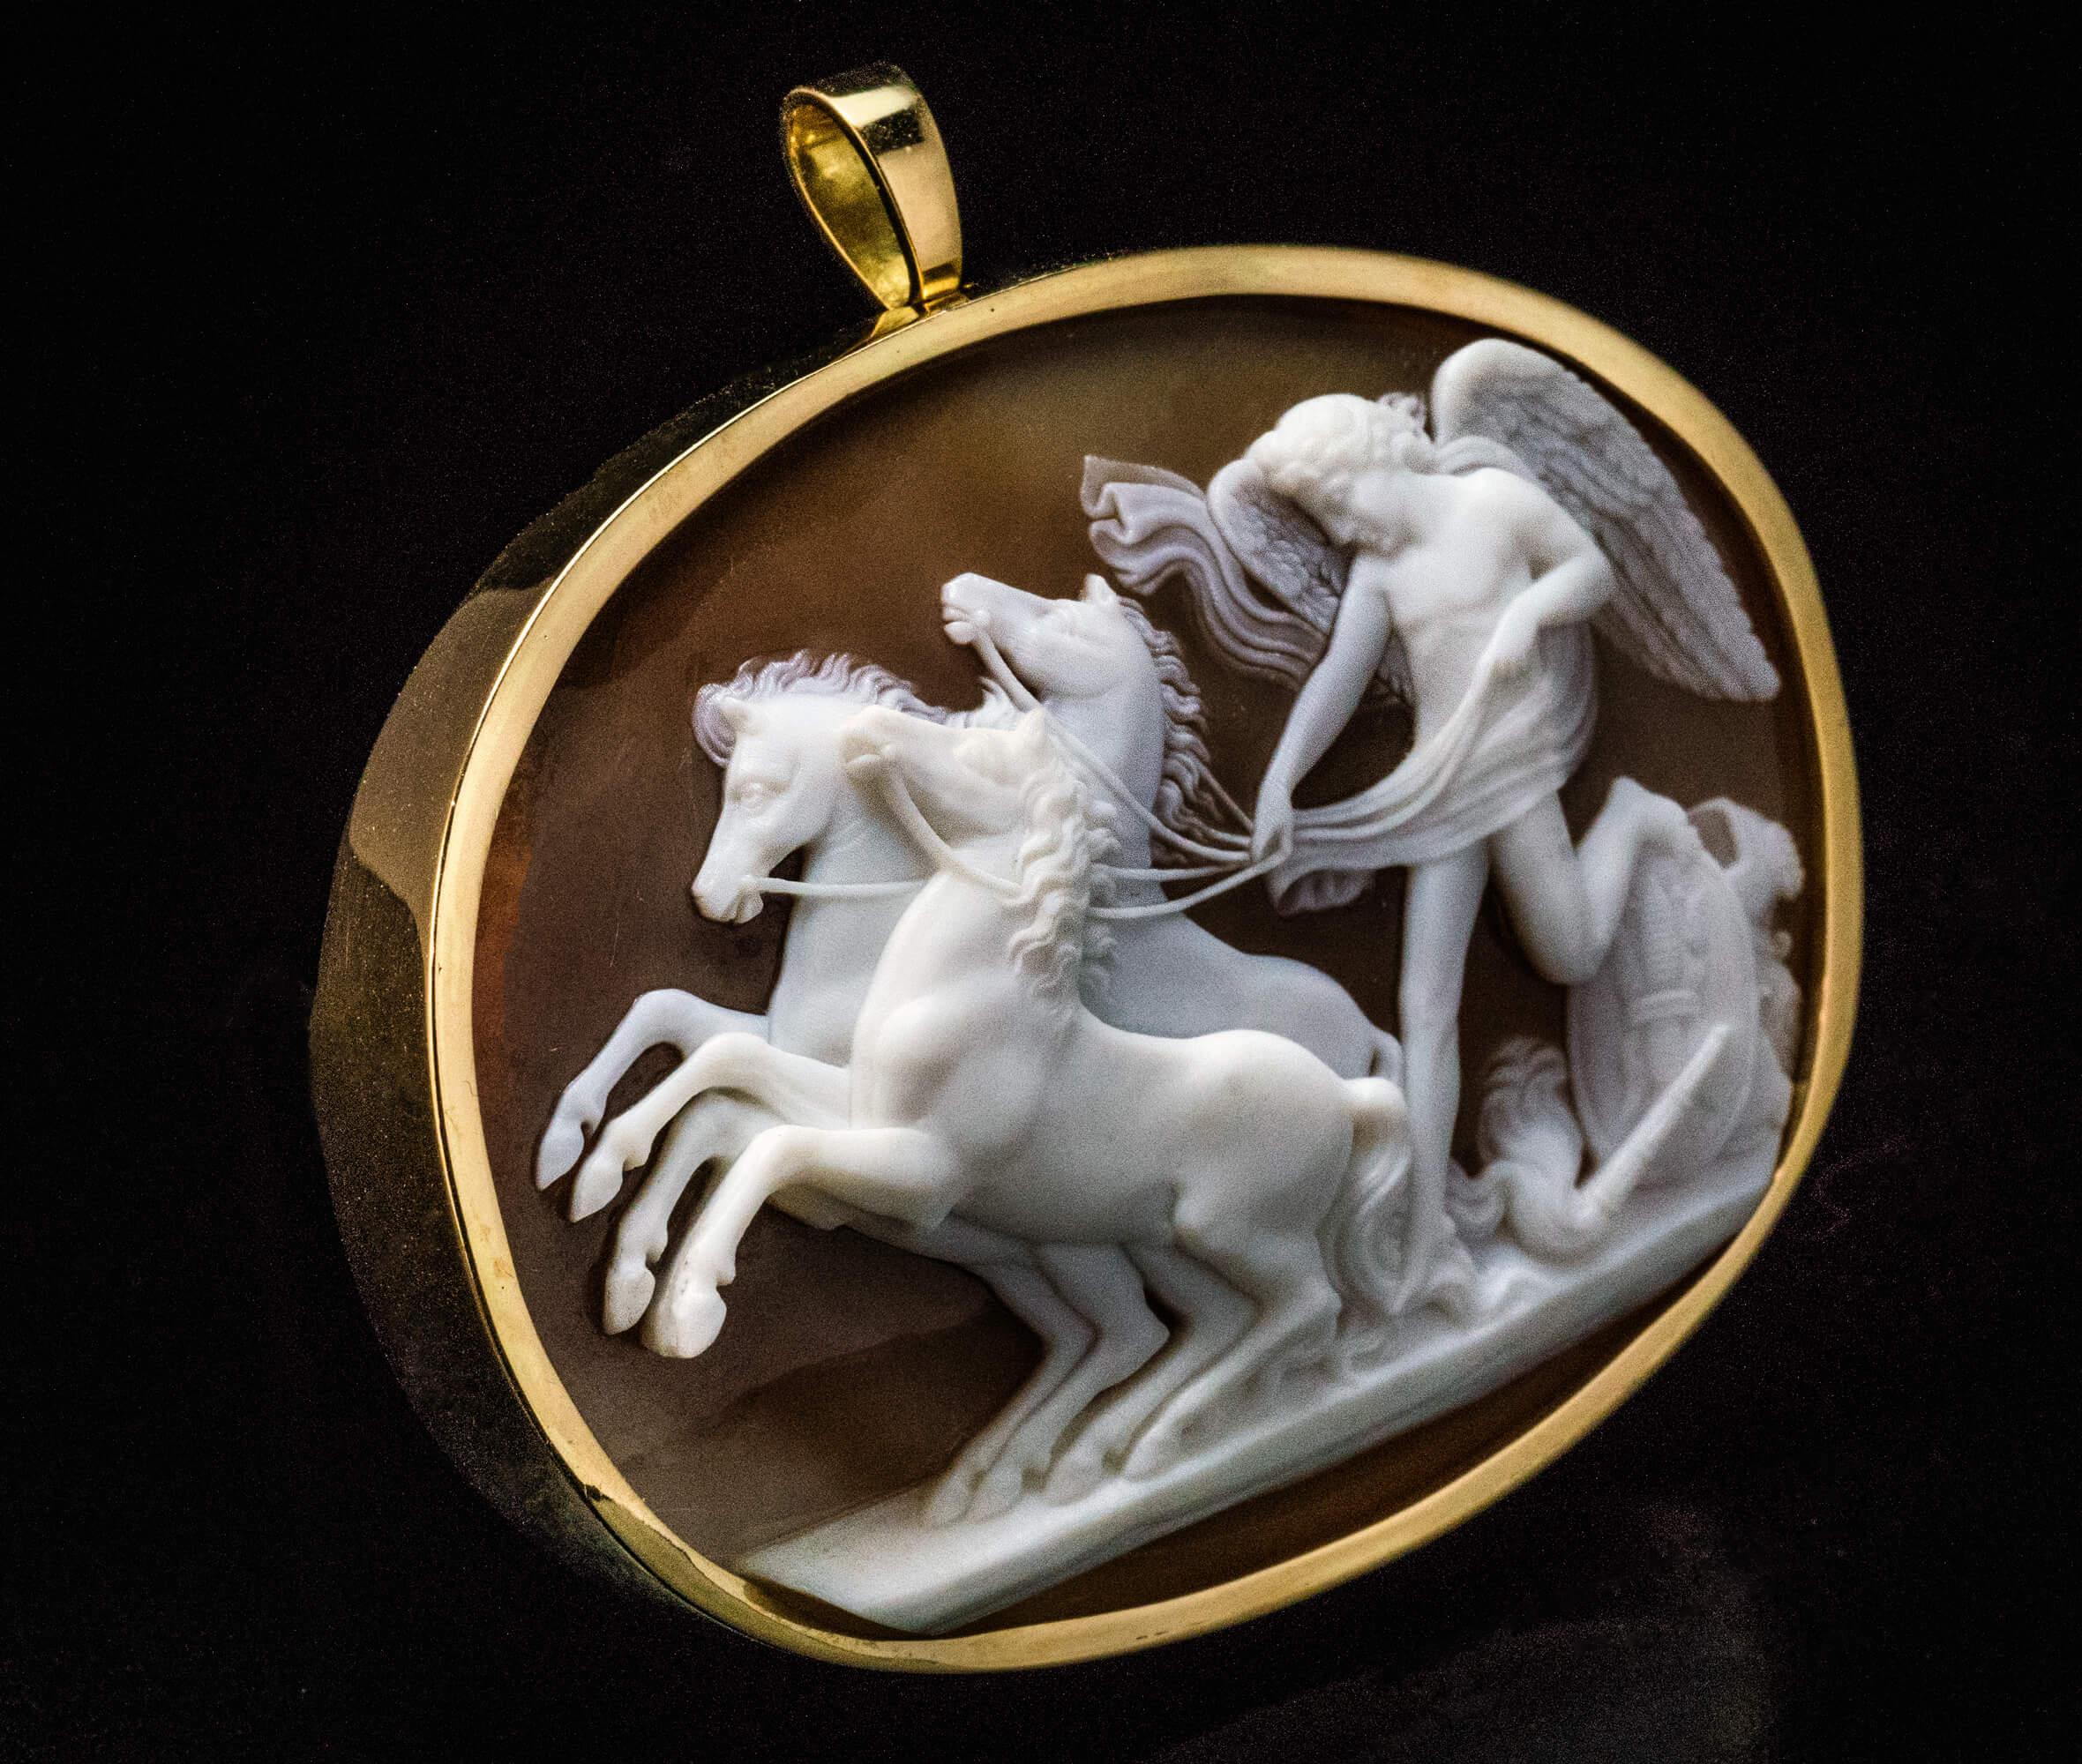 Italian, circa 1860s.

This large antique shell cameo is superbly carved after either Tommaso or Luigi Saulini with Peace (depicted as a winged youth) Halting the Horses of Mars. The cameo is set in an 18K gold bezel with a folding bail and a pin